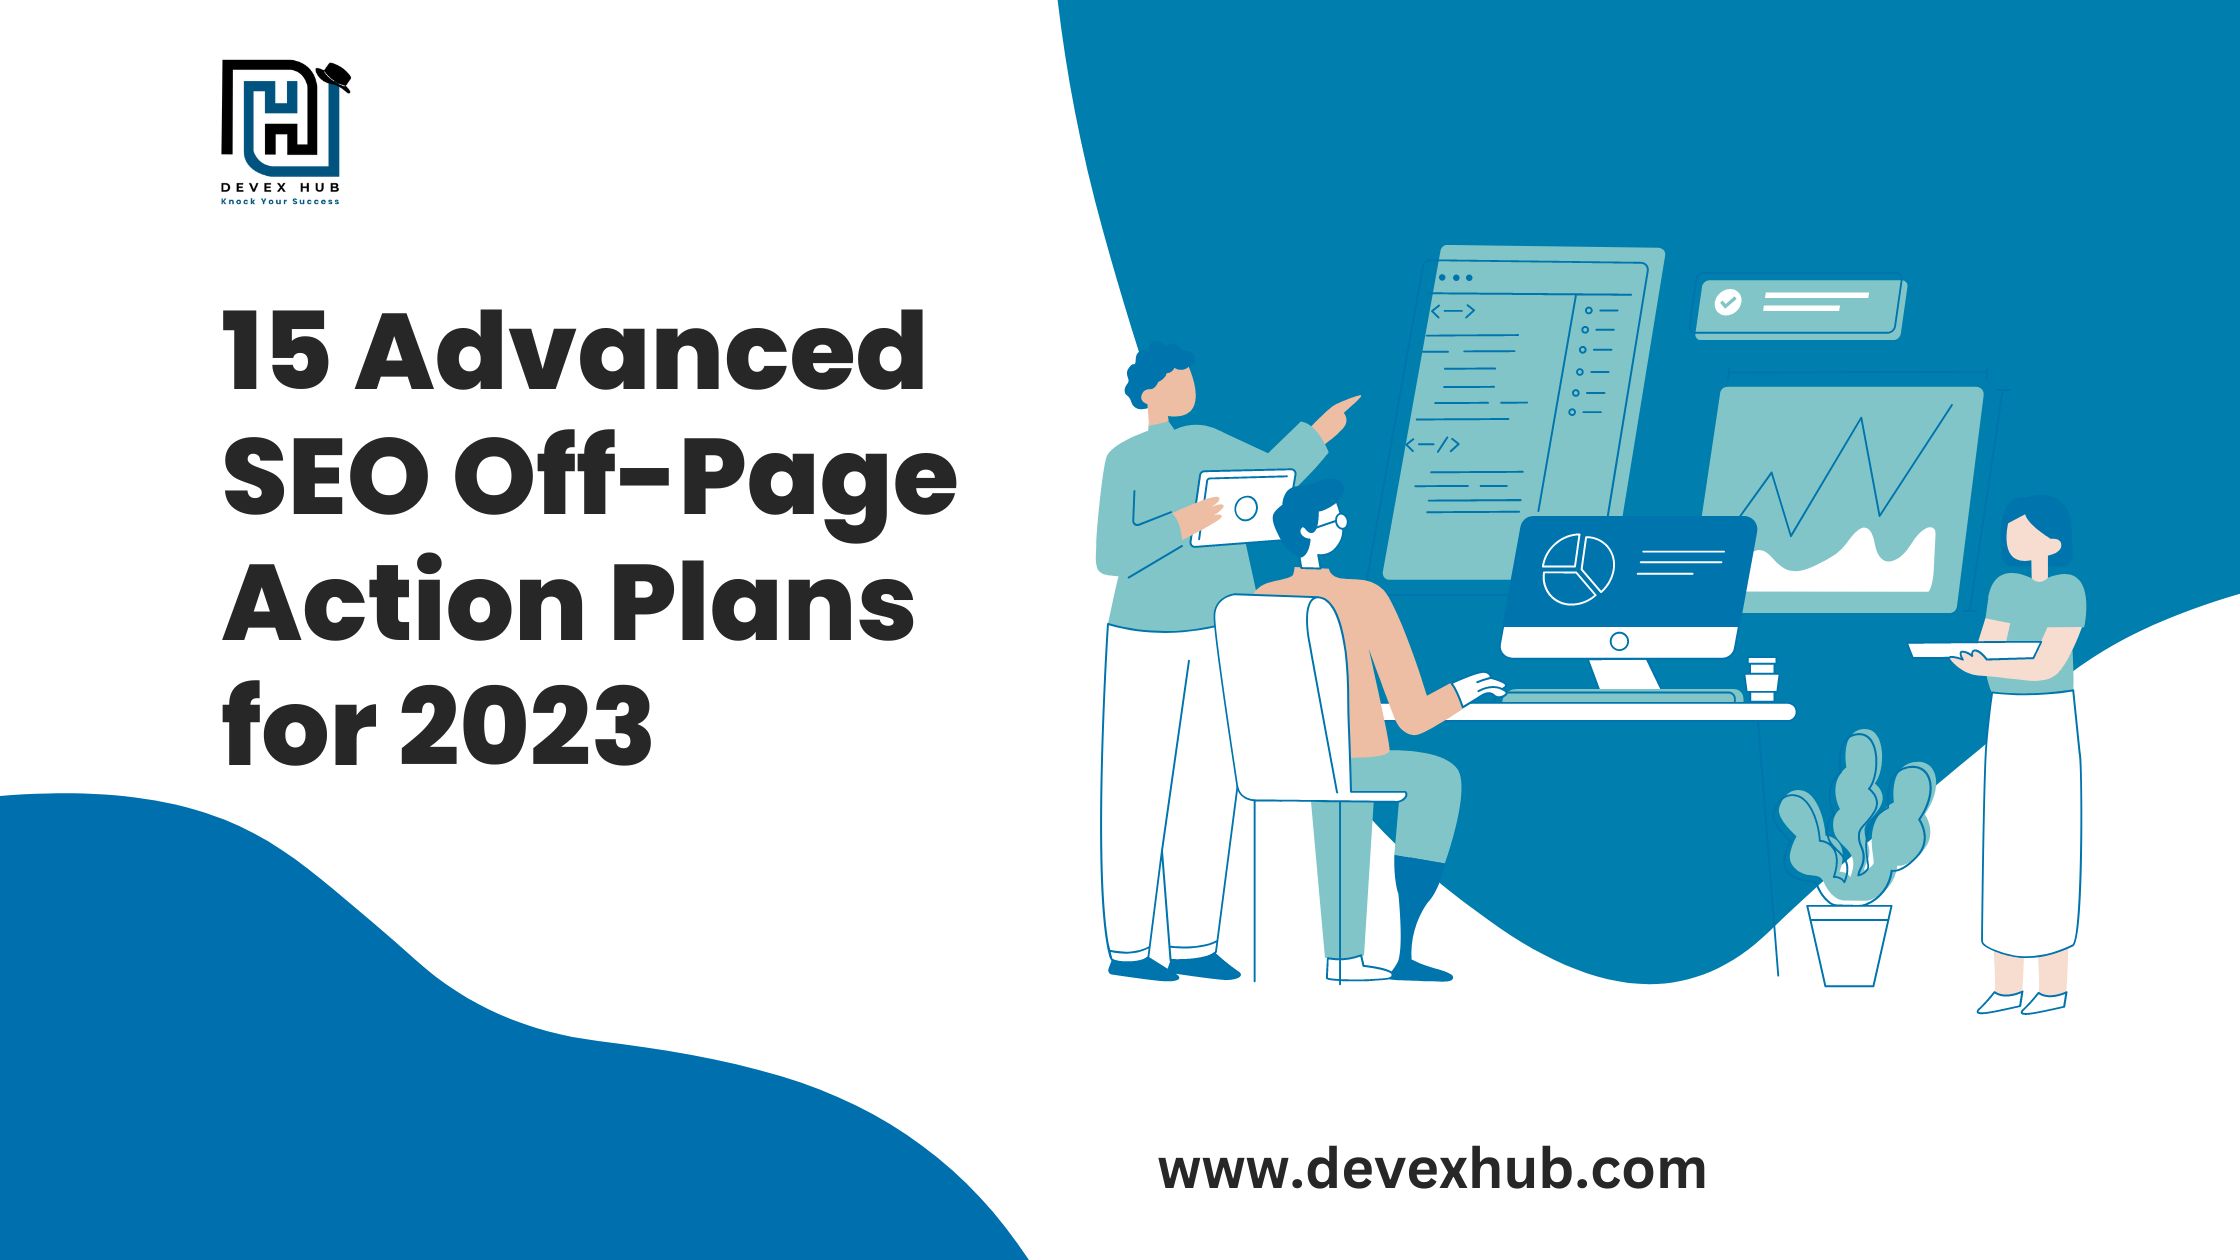 15 Advanced SEO Off-Page Action Plans for 2023